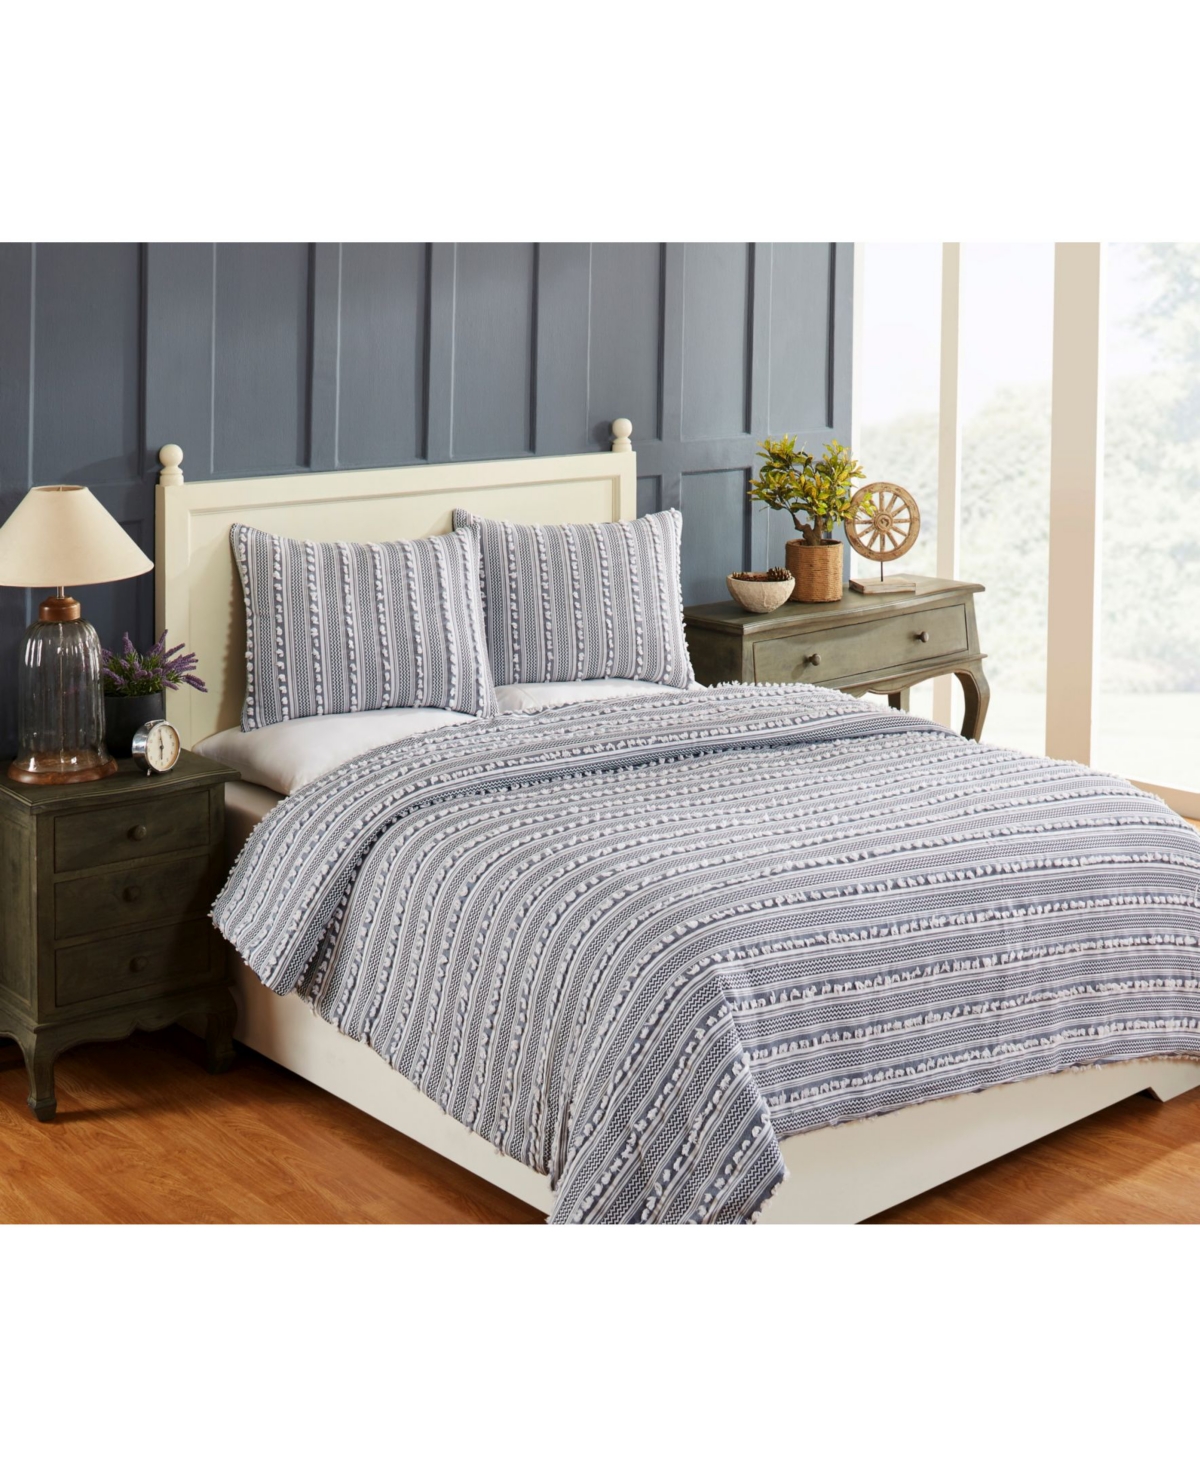 Anglique Twin Comforter Bedding